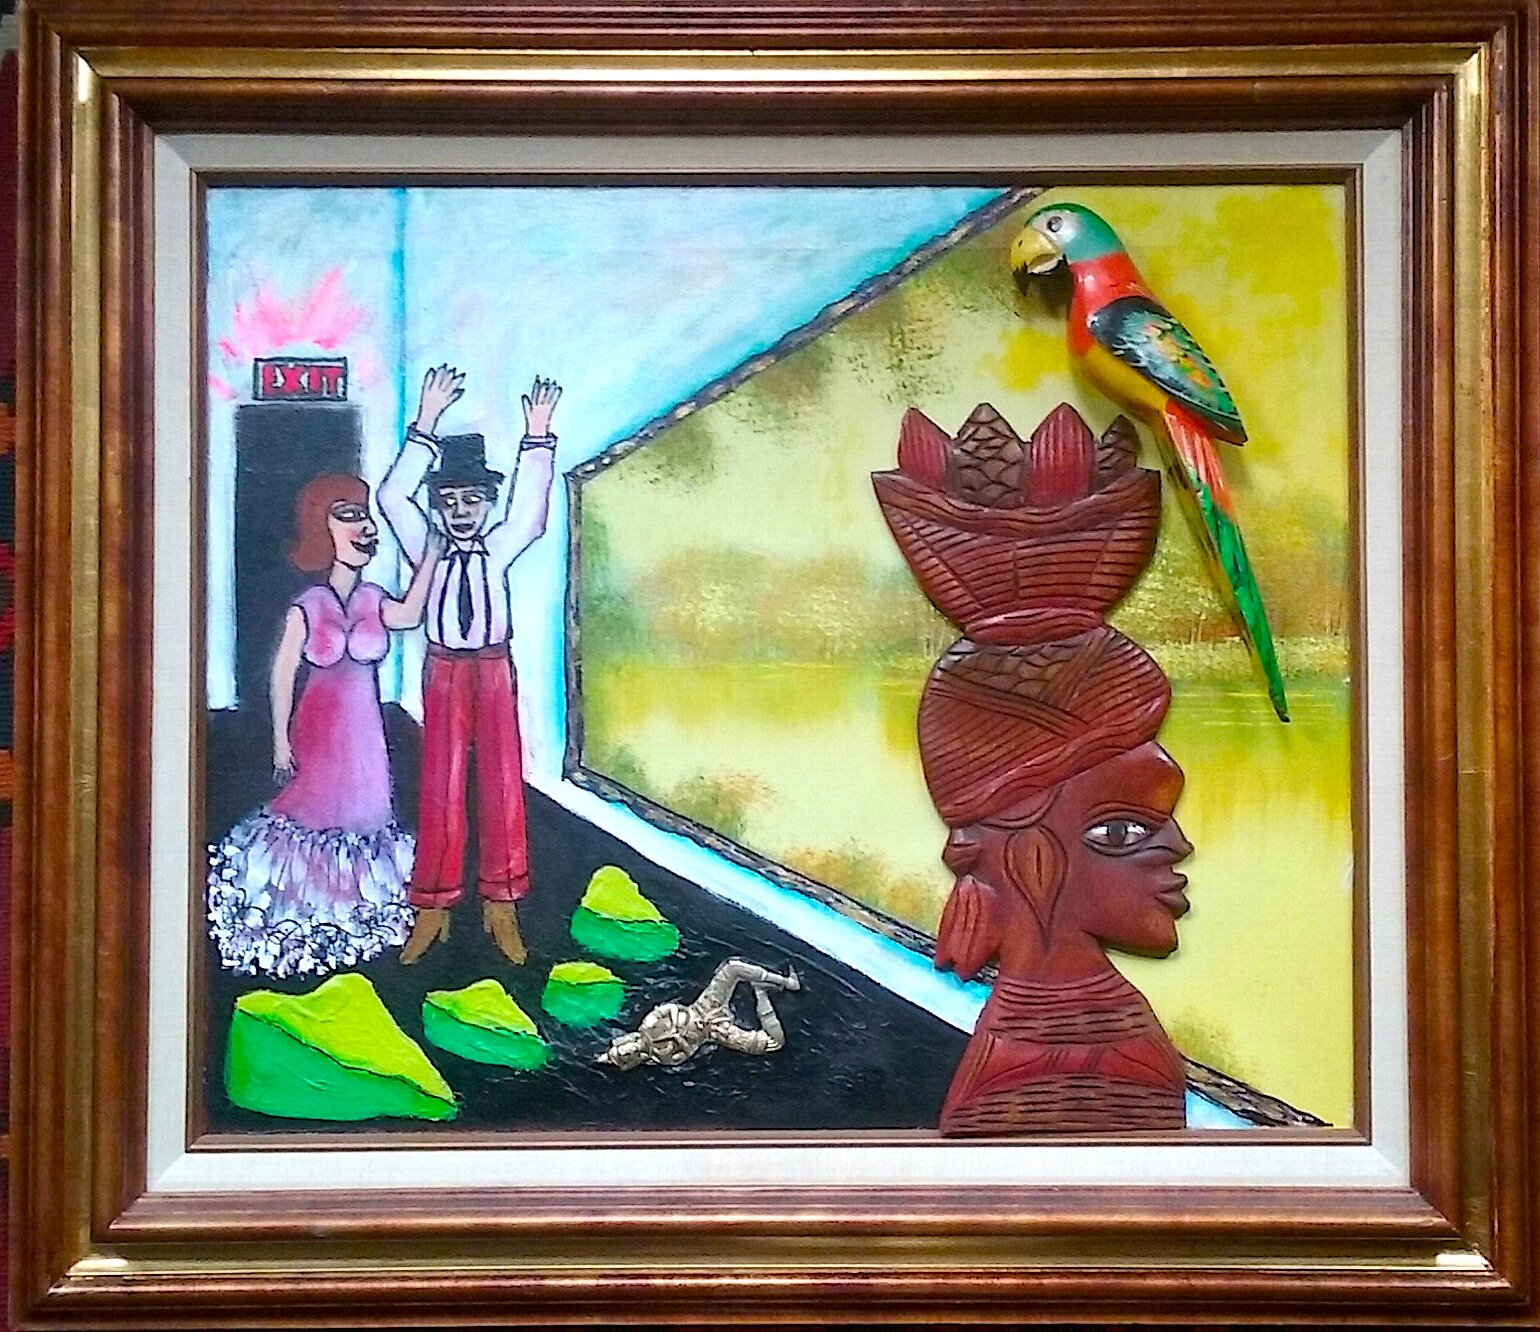 A Night at the Museum, 2005. Oil, acrylic, wood, metal on canvas. 28" x 32".